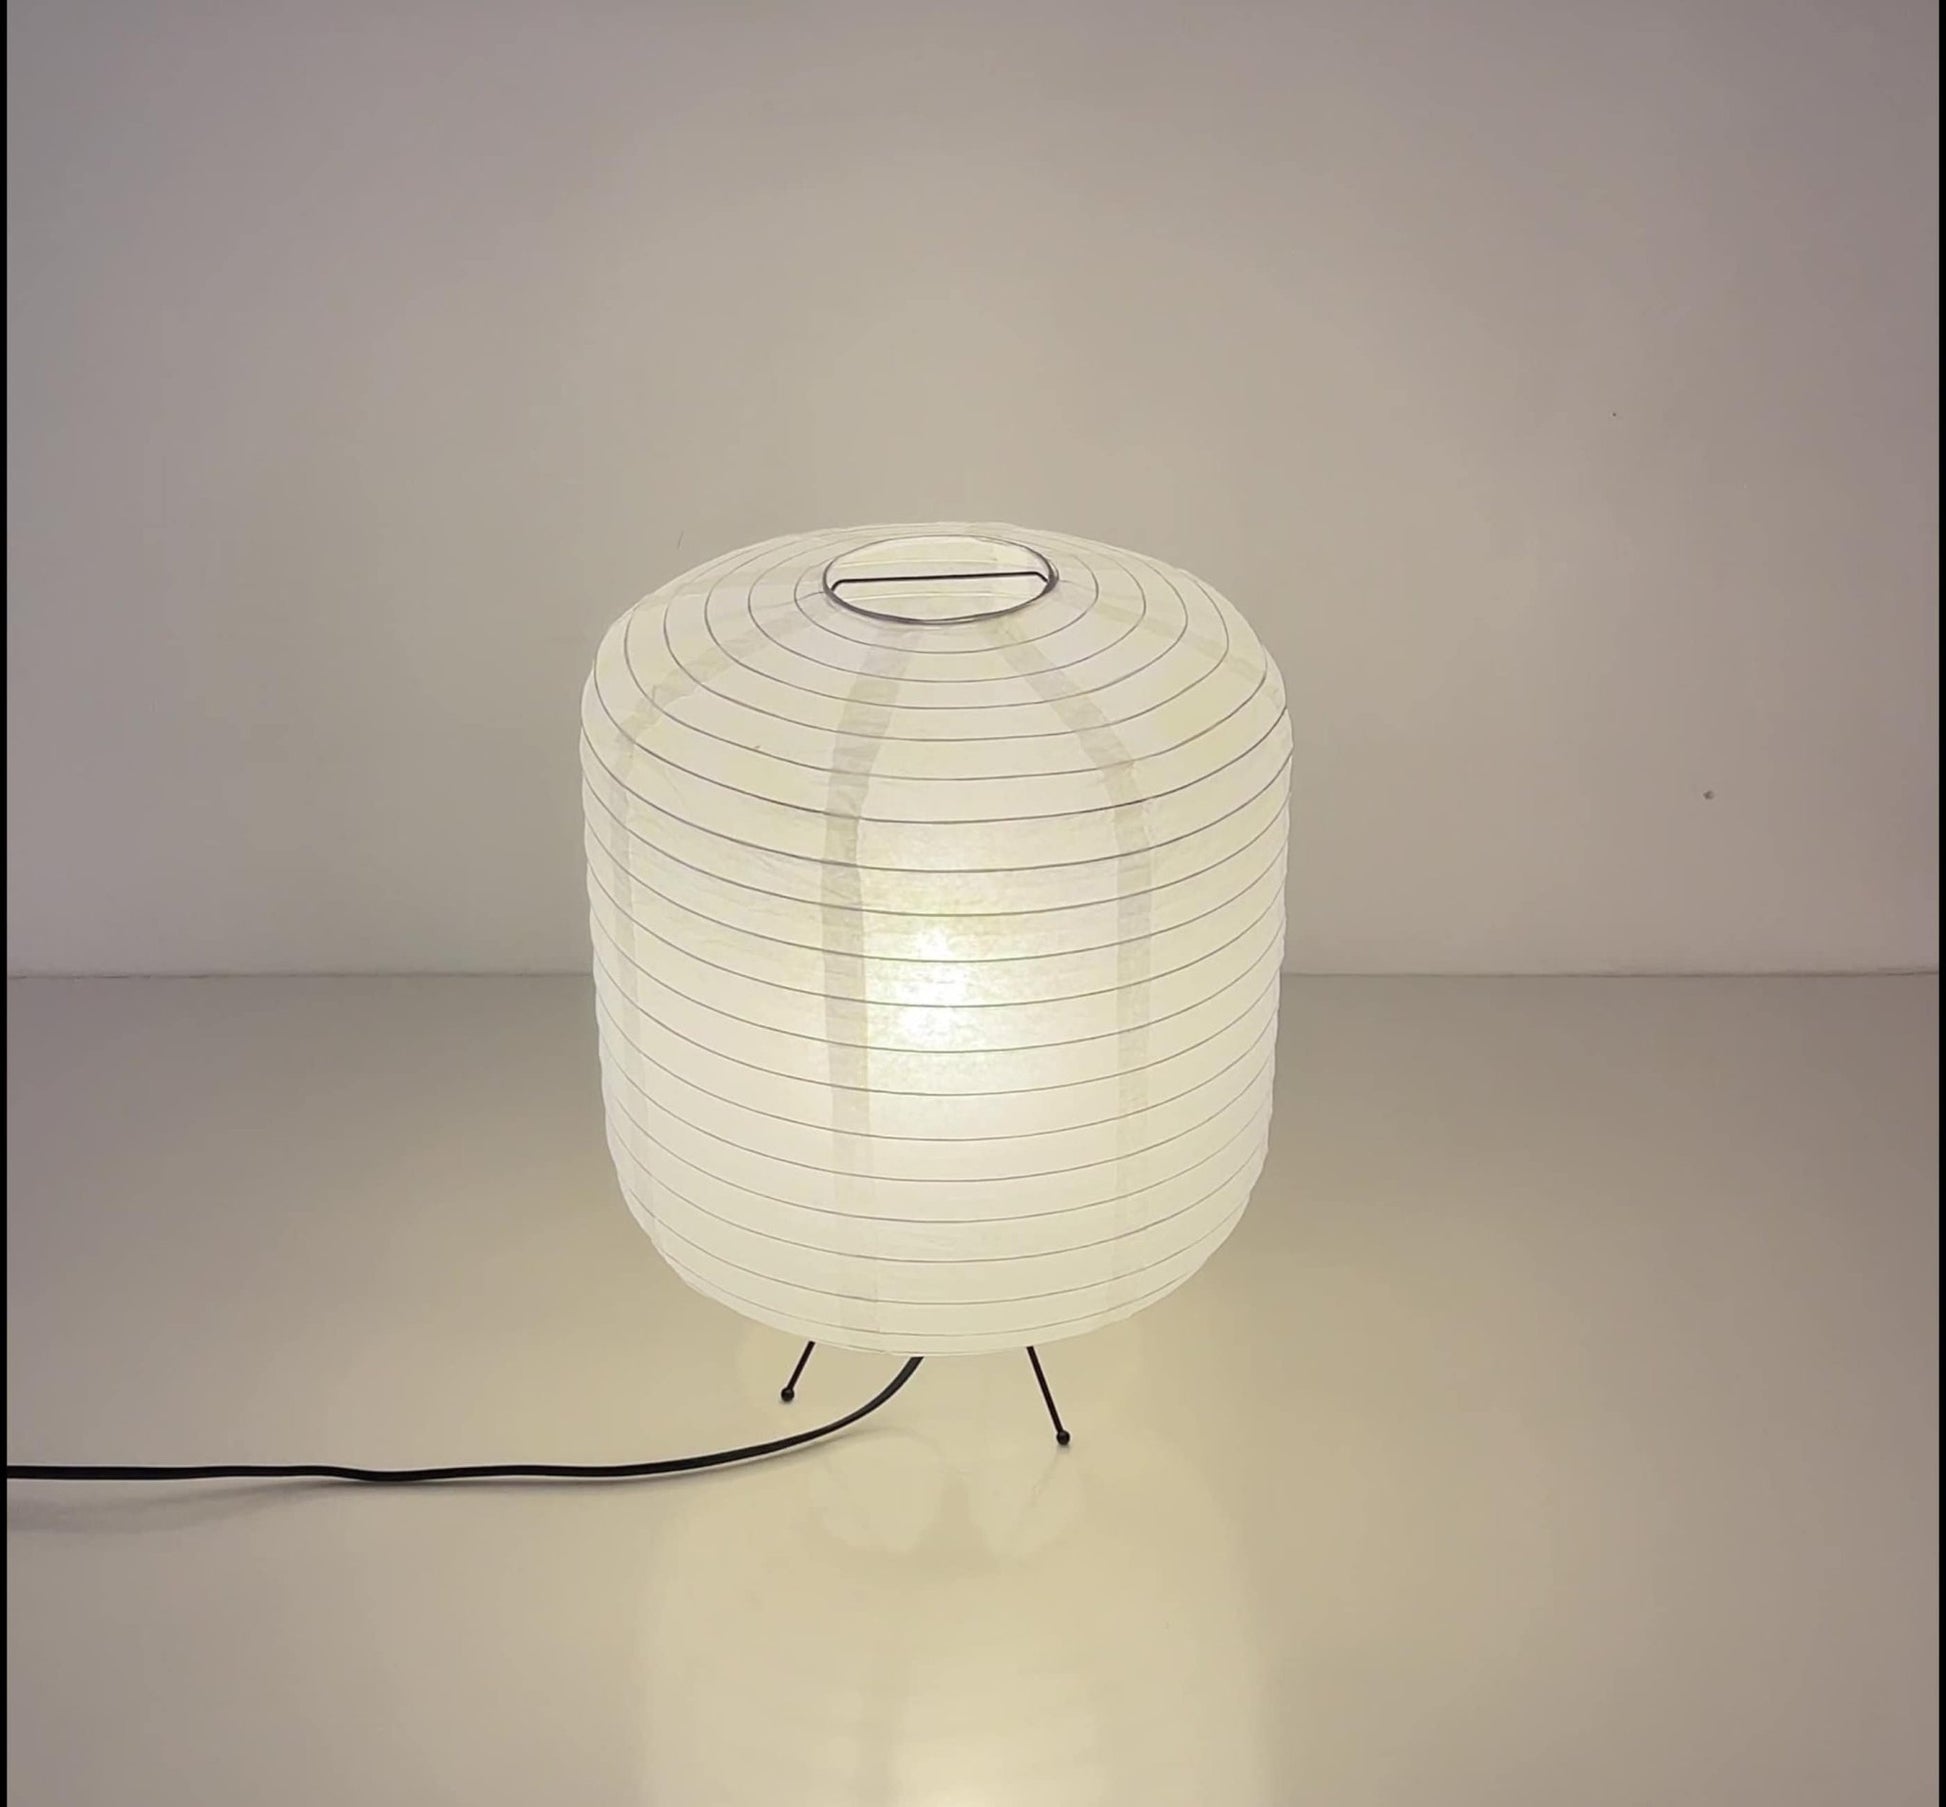 Paper Table Lamp, Cylinder Rounded Shape | Mid Century Table Lamp, Asian, Japanese, Scandinavian, Desk Lamp, Bedside Light - -